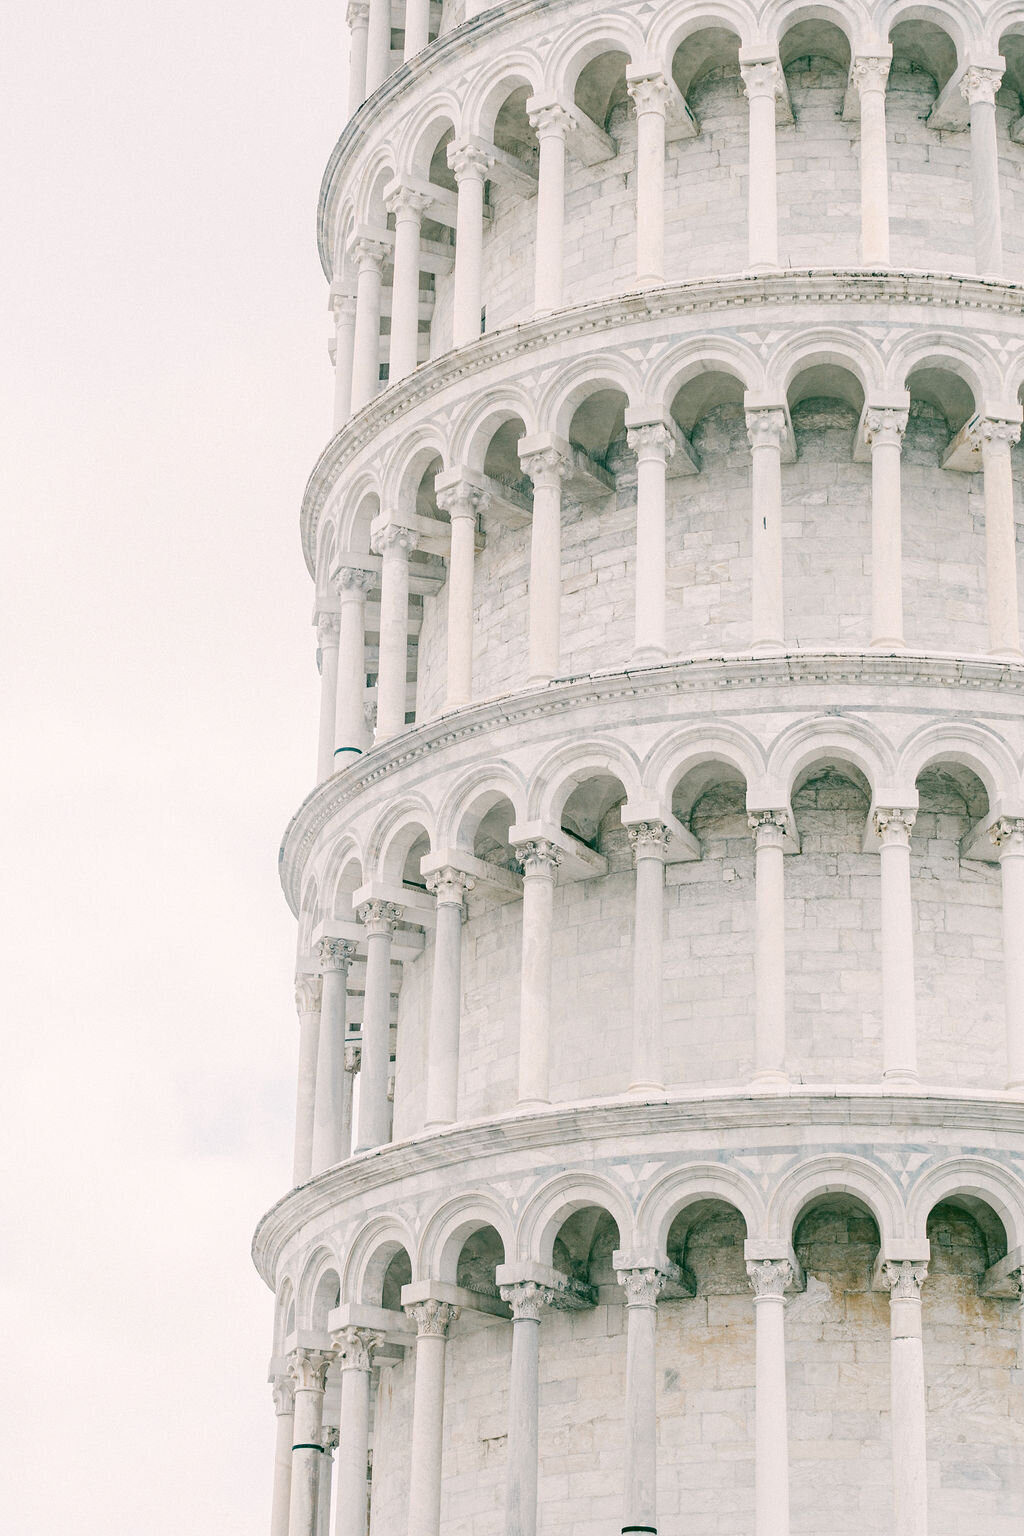 Leaning Tower of Piza Destination Travel Photographer